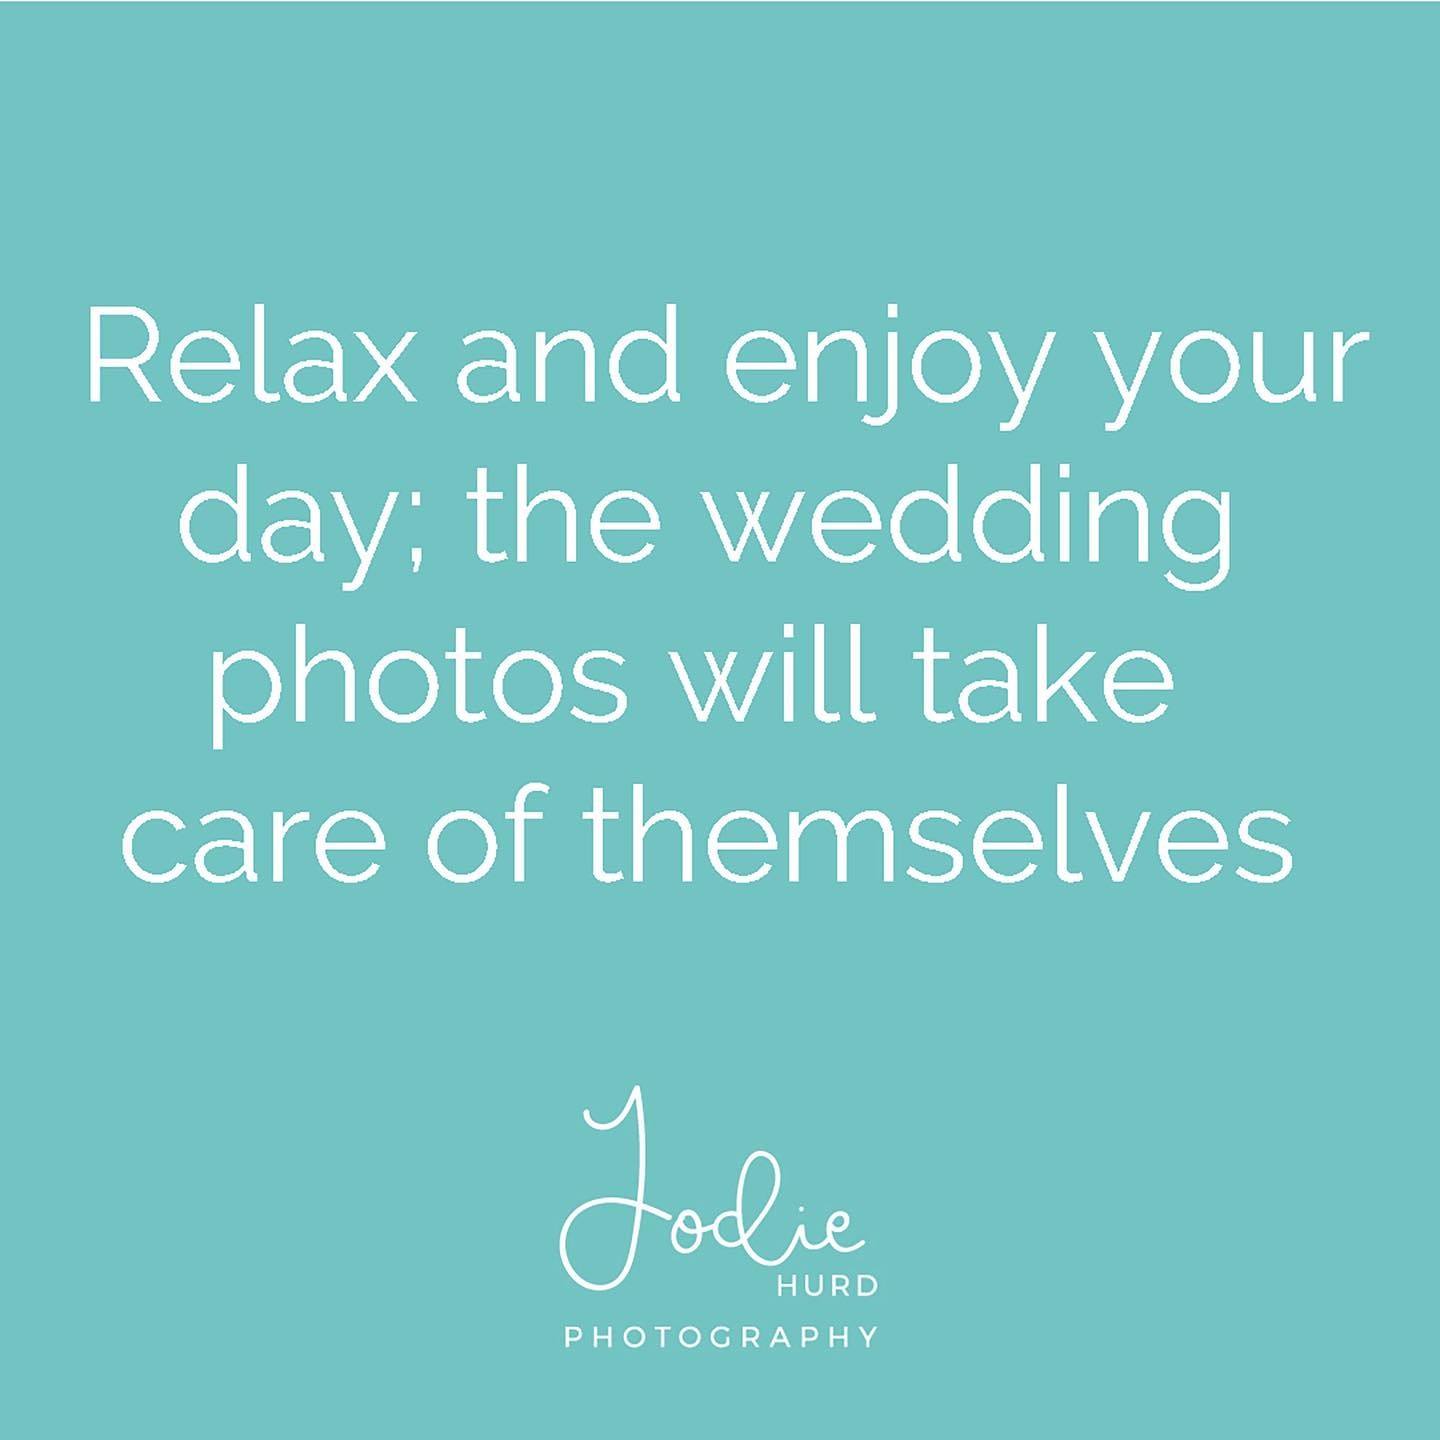 Its the one piece of advice I give to all couples getting married.

You having fun = great photos
You worrying = not so great photos

Yes it's hard to relax in front of the camera but the person behind it should make you feel relaxed, that's why I love to chat with all my couples and get to know them so well. 

Make a connection with your photographer and you are half way there already.